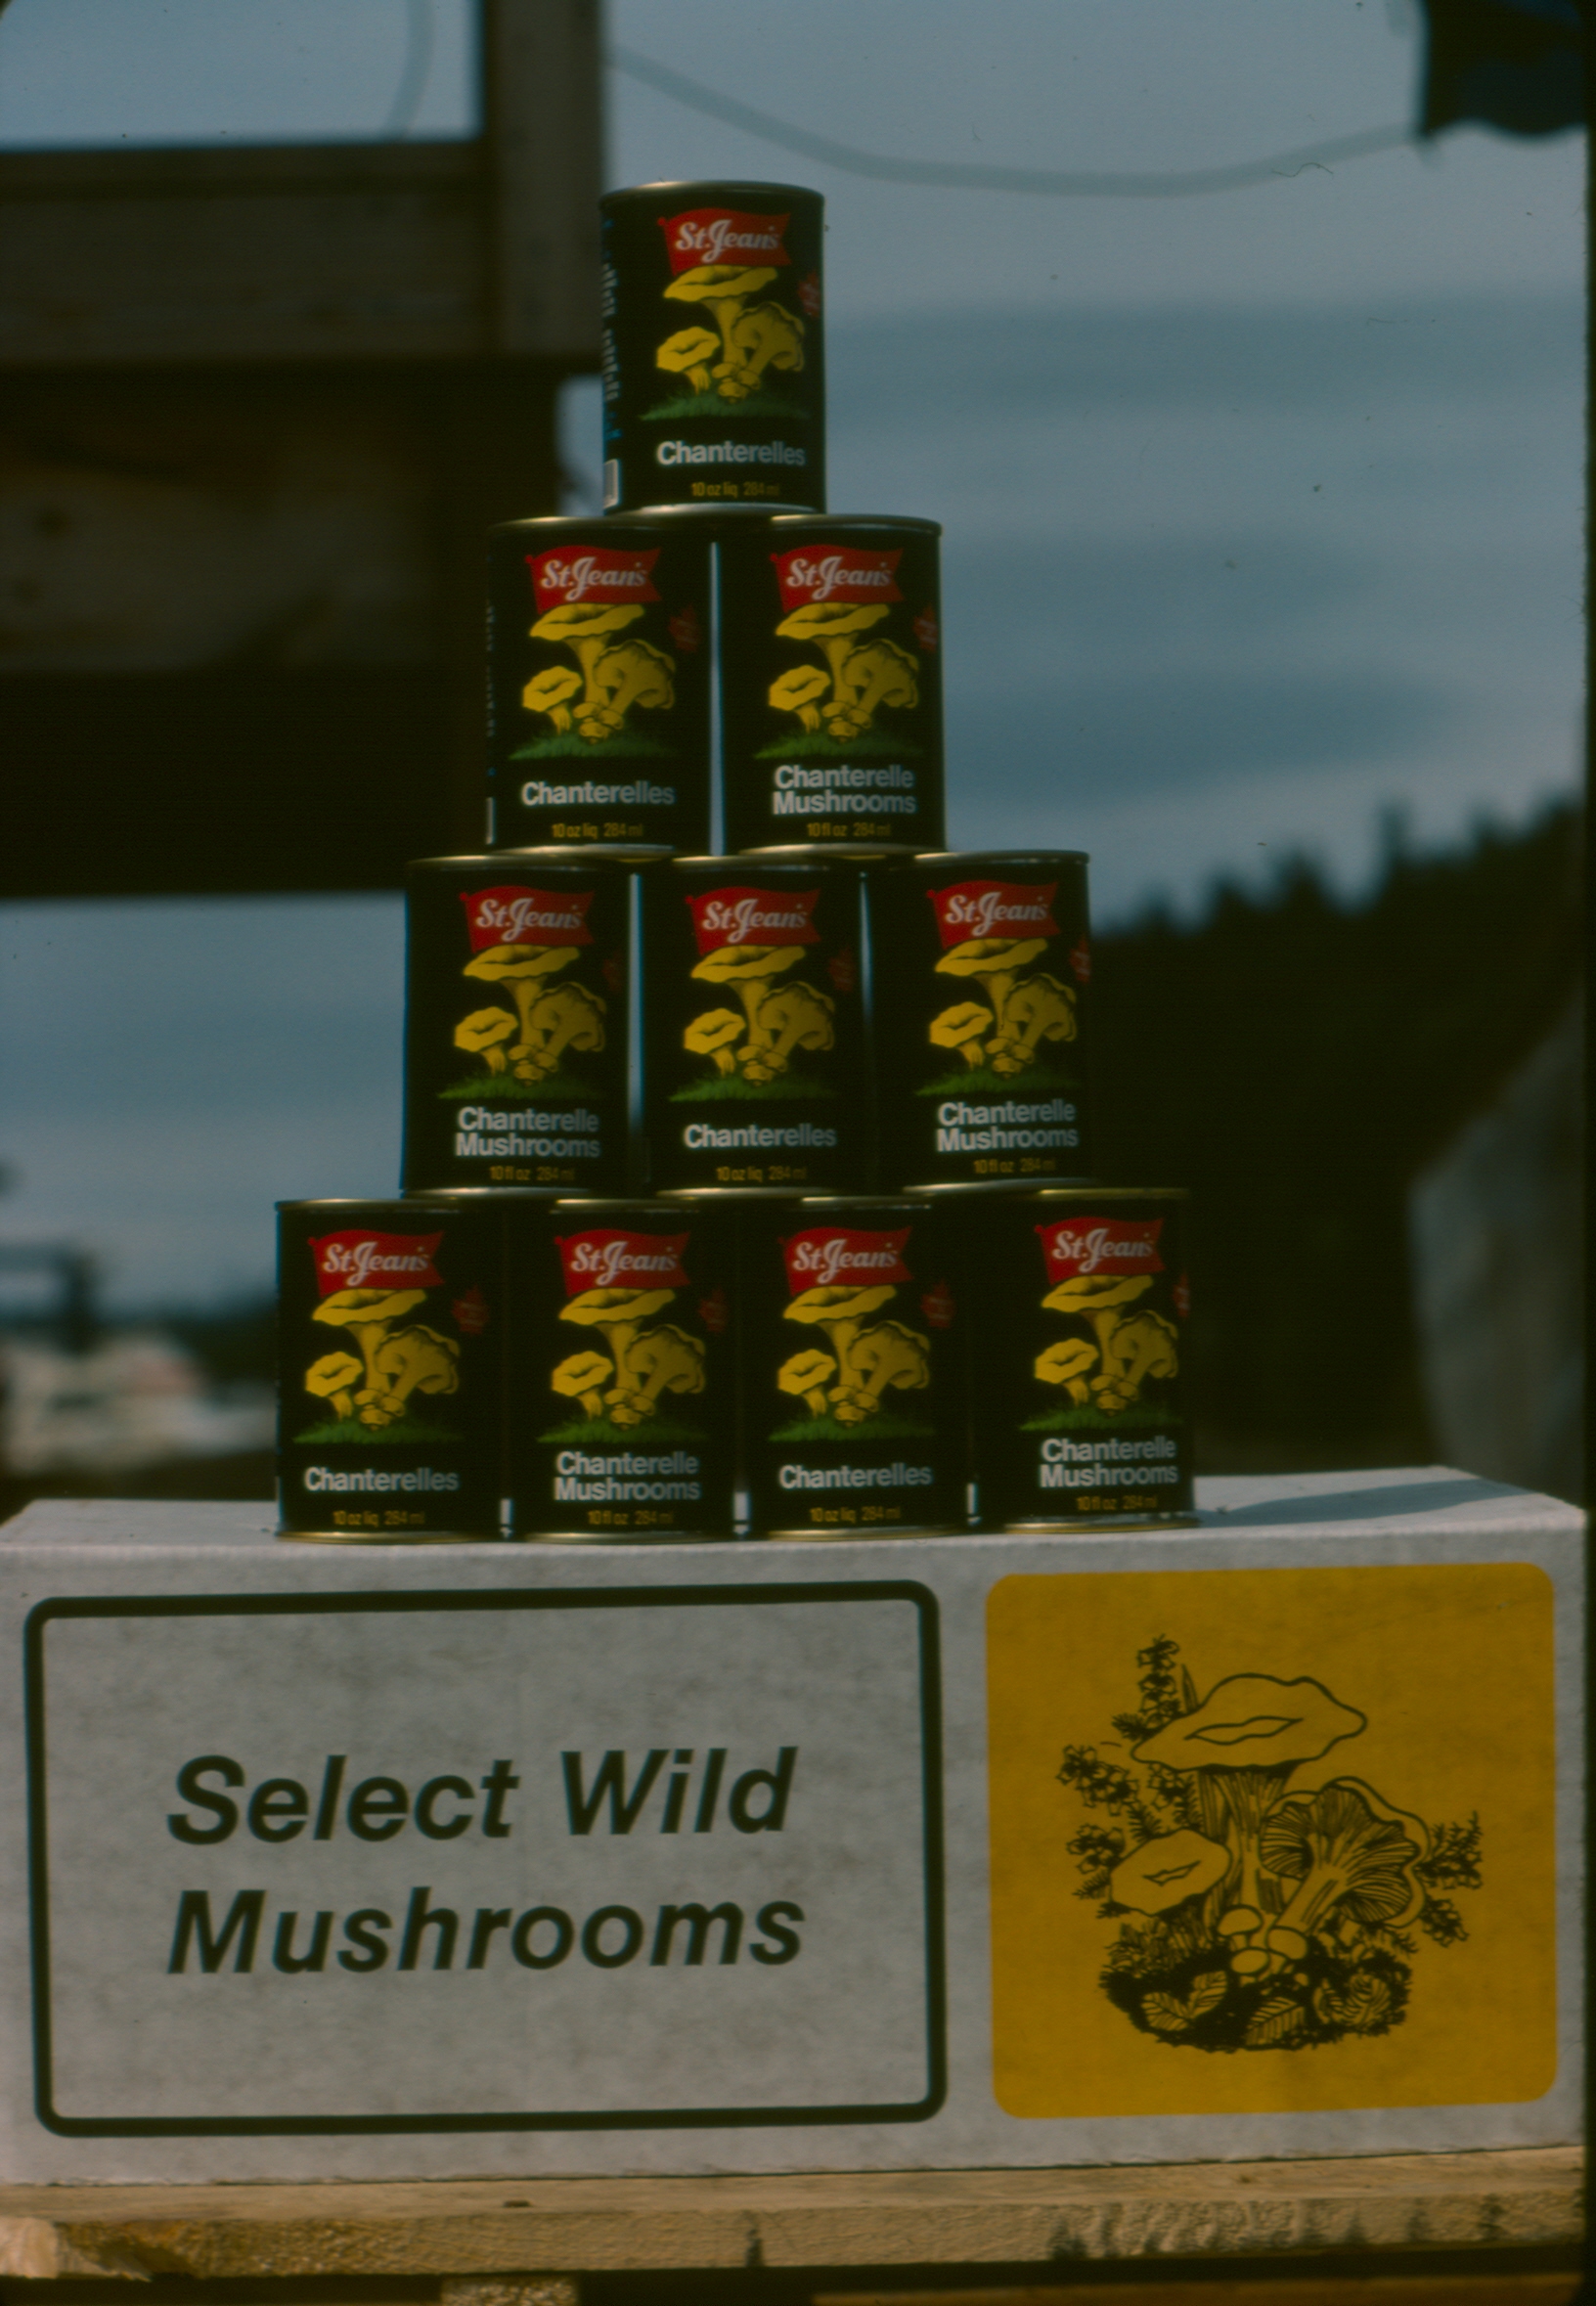 BC canned chanterelles for export to Germany. St. Jean’s cannery, Nanaimo 1985 (photo P. Kroeger)